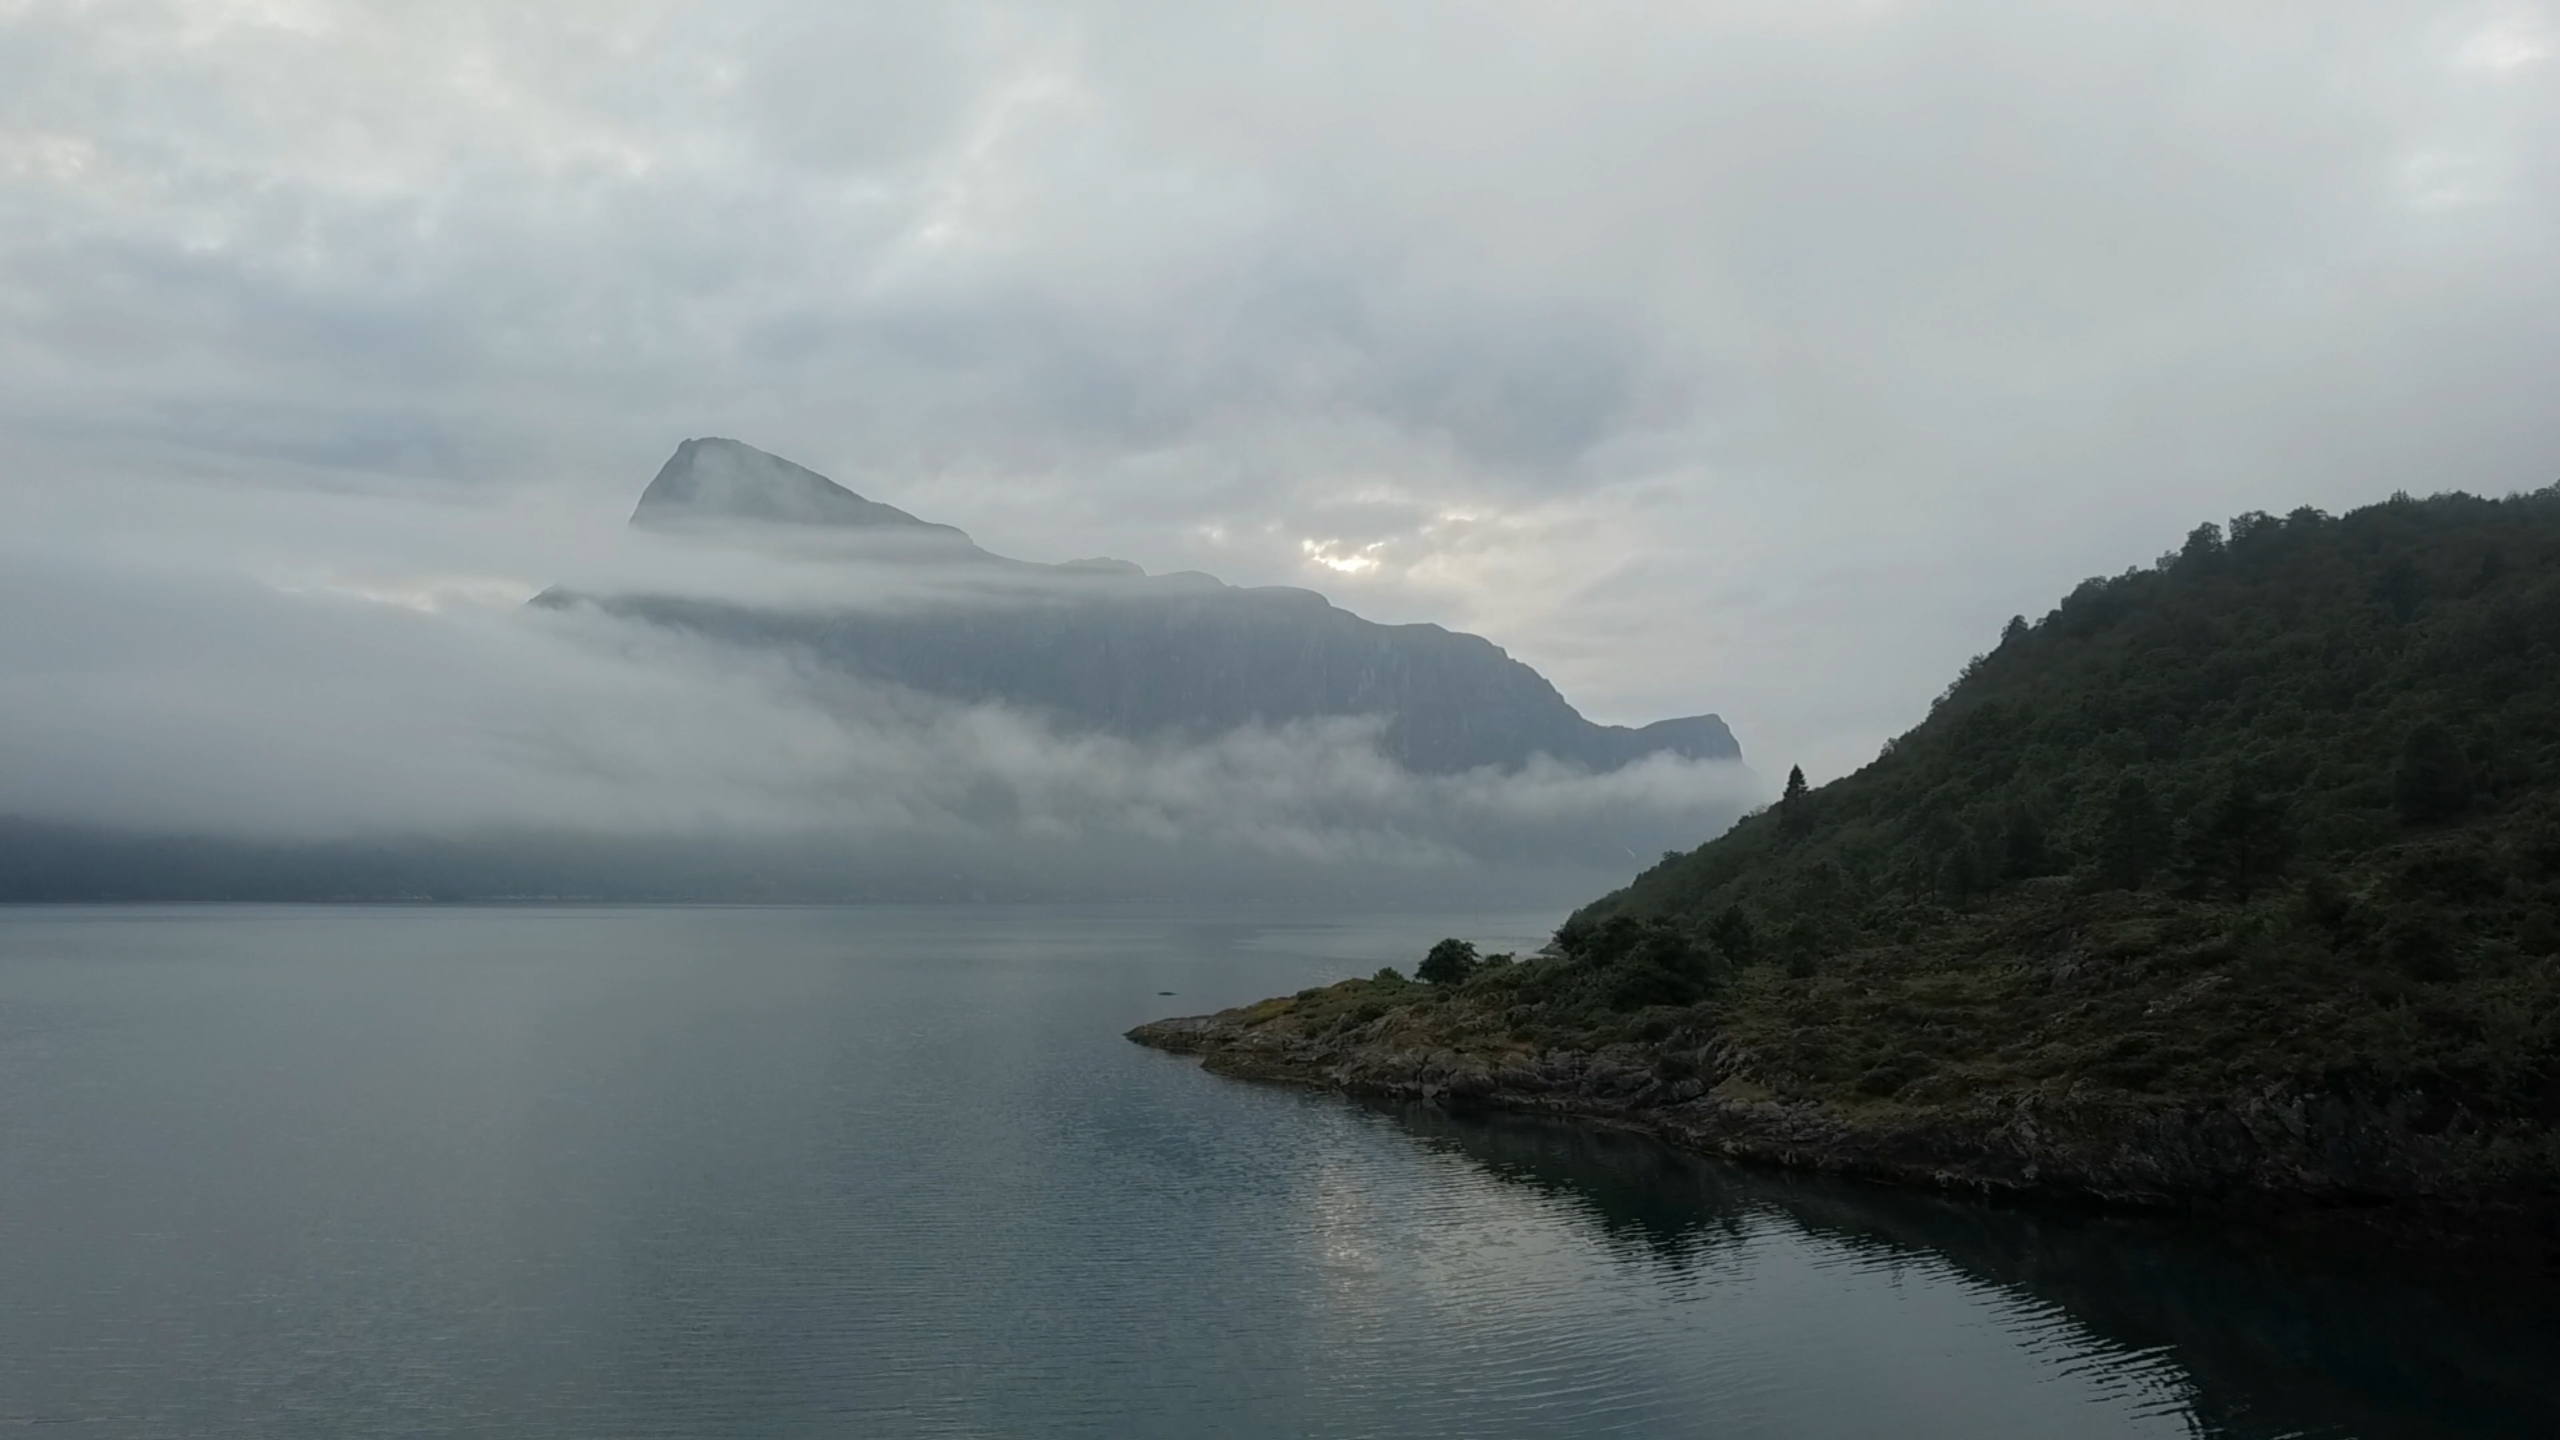 A mountain over a fjord in Norway emerges from a veil of cloud and mist.